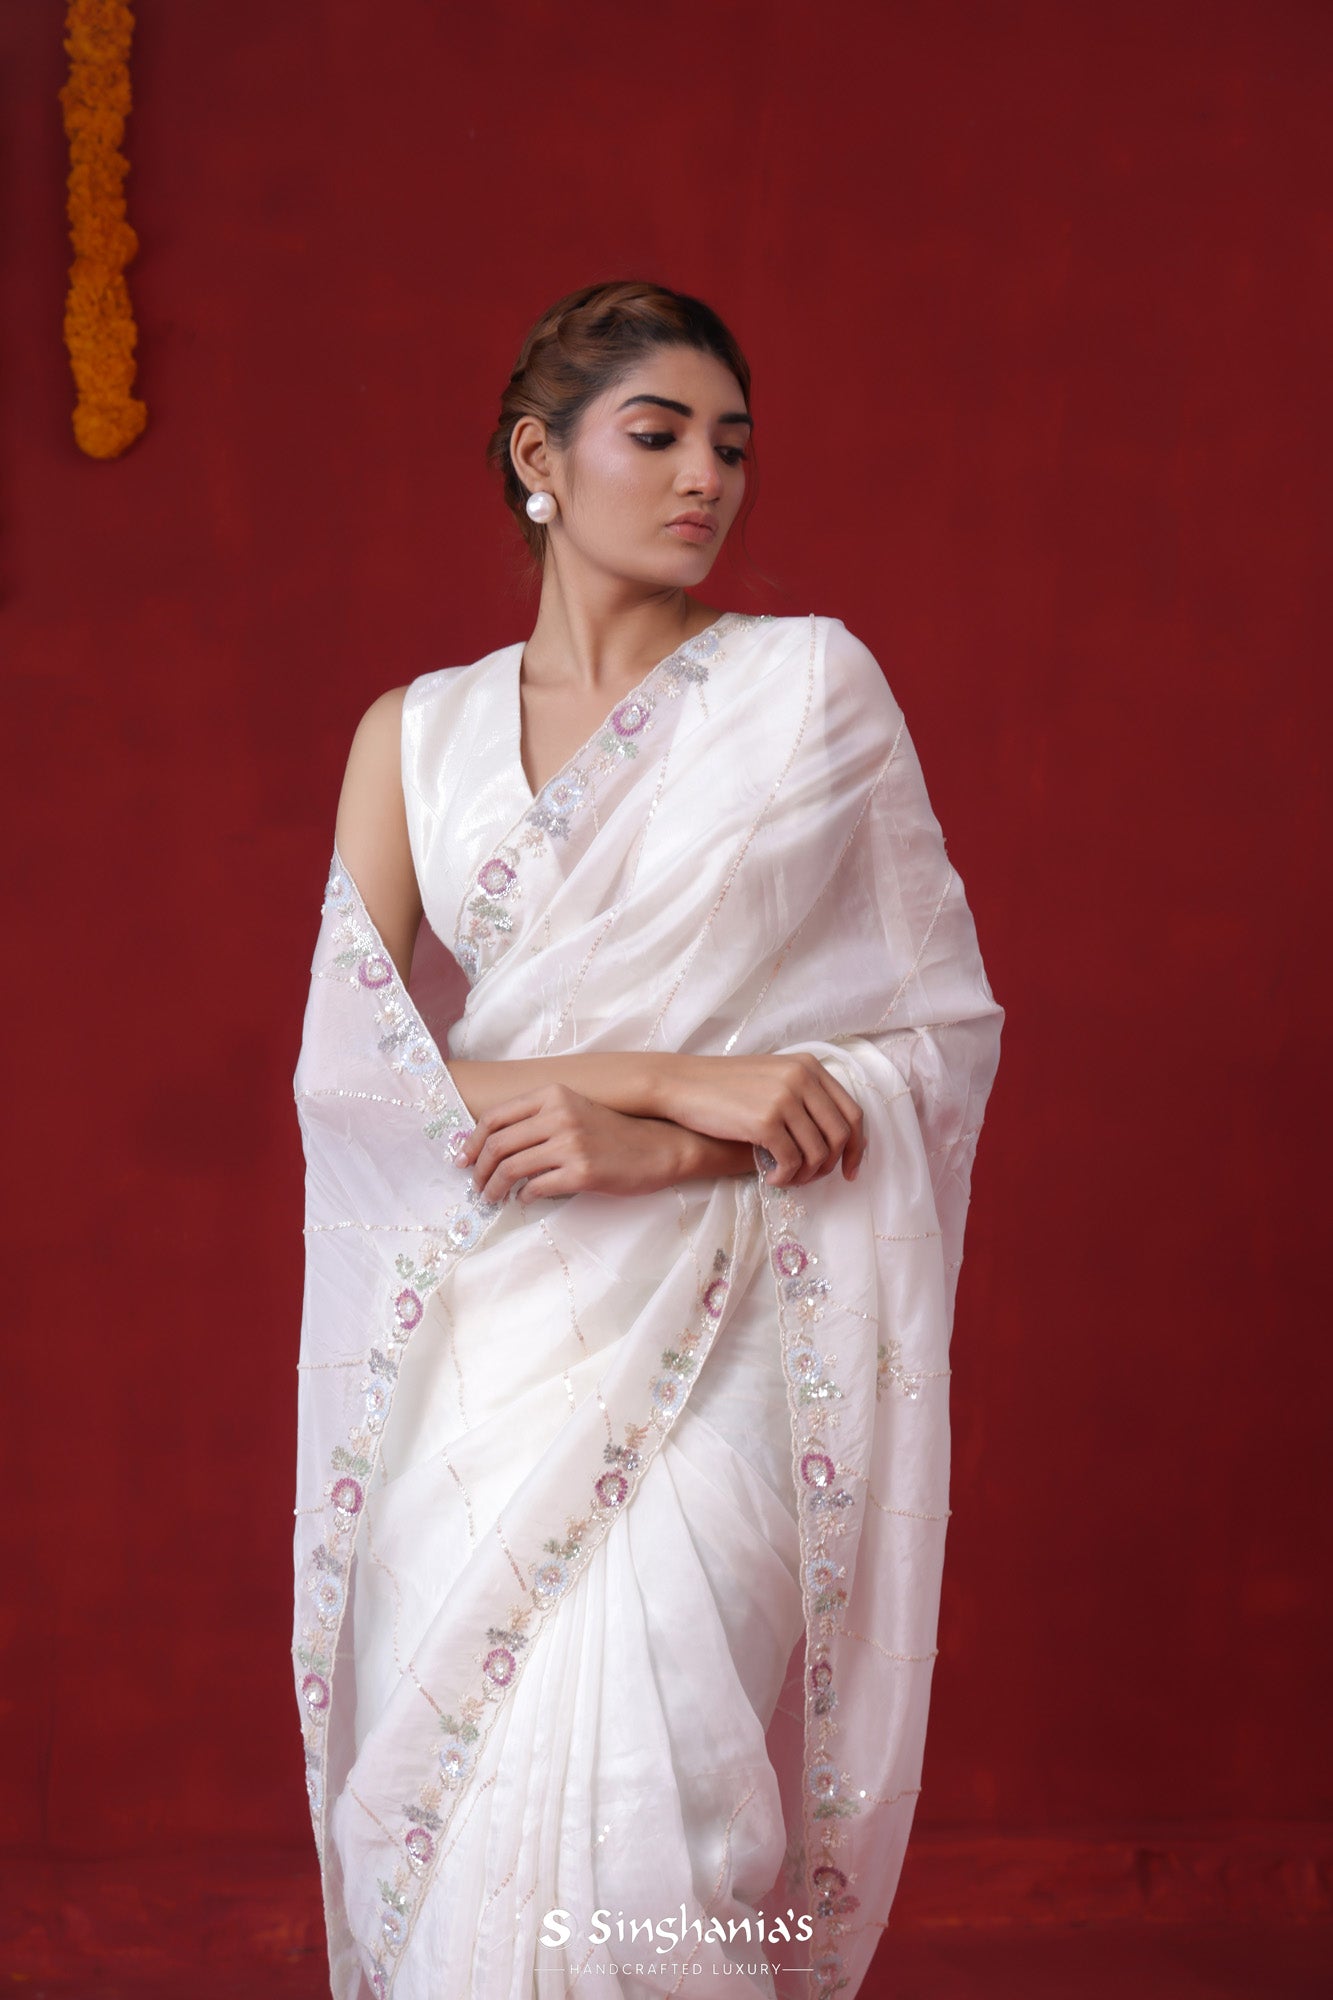 Dull White Organza Saree With Hand Embroidery